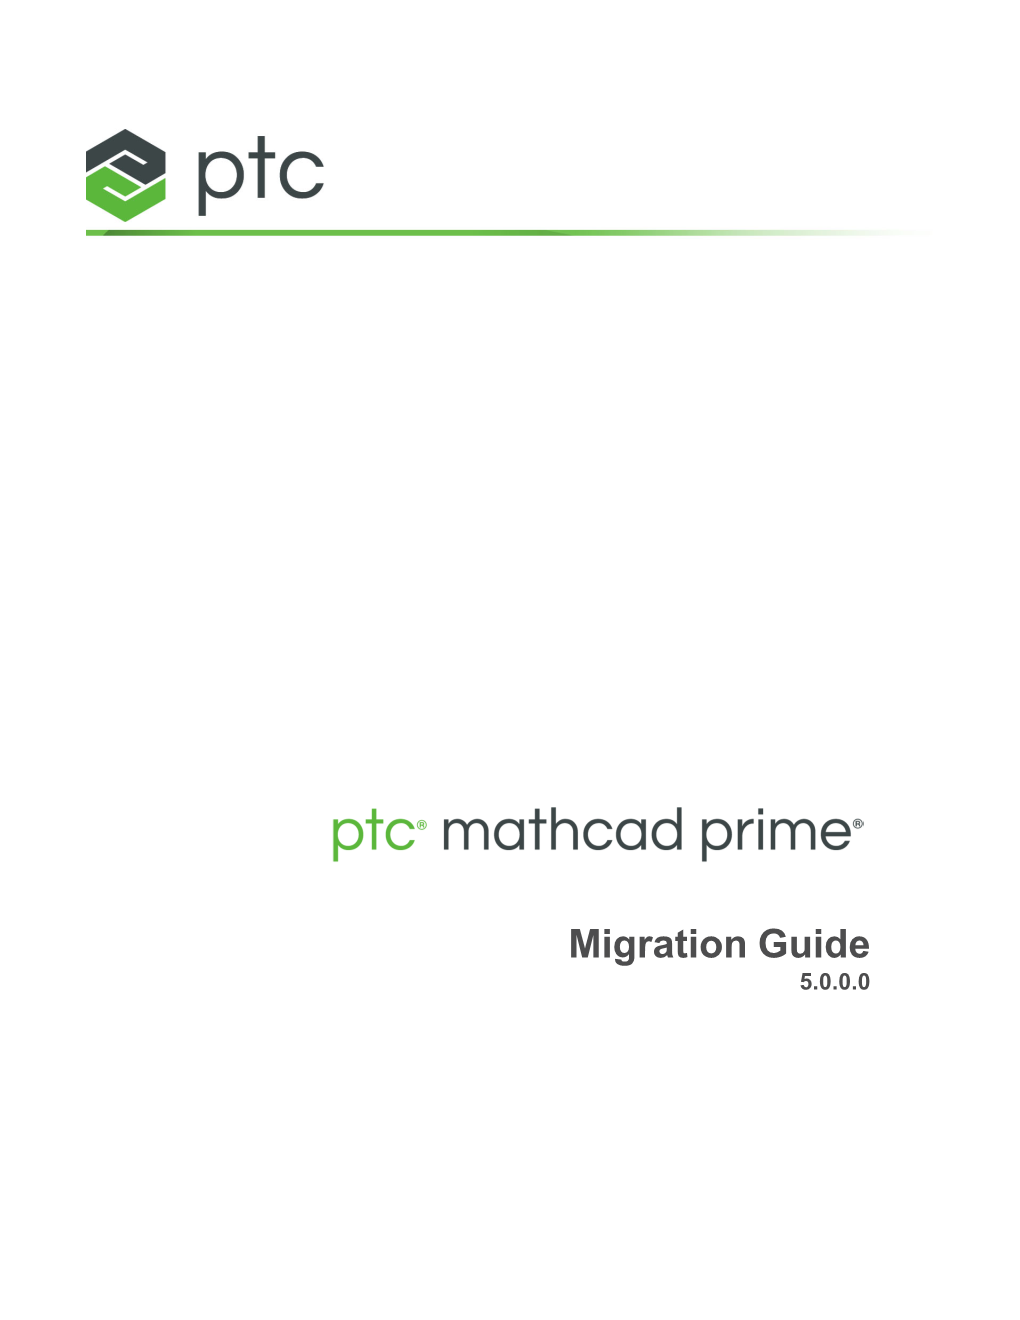 PTC Mathcad Prime Migration Guide Note • the Worksheets Generated by the XMCD, MCD Converter Cannot Be Read by Previous Versions of PTC Mathcad Prime